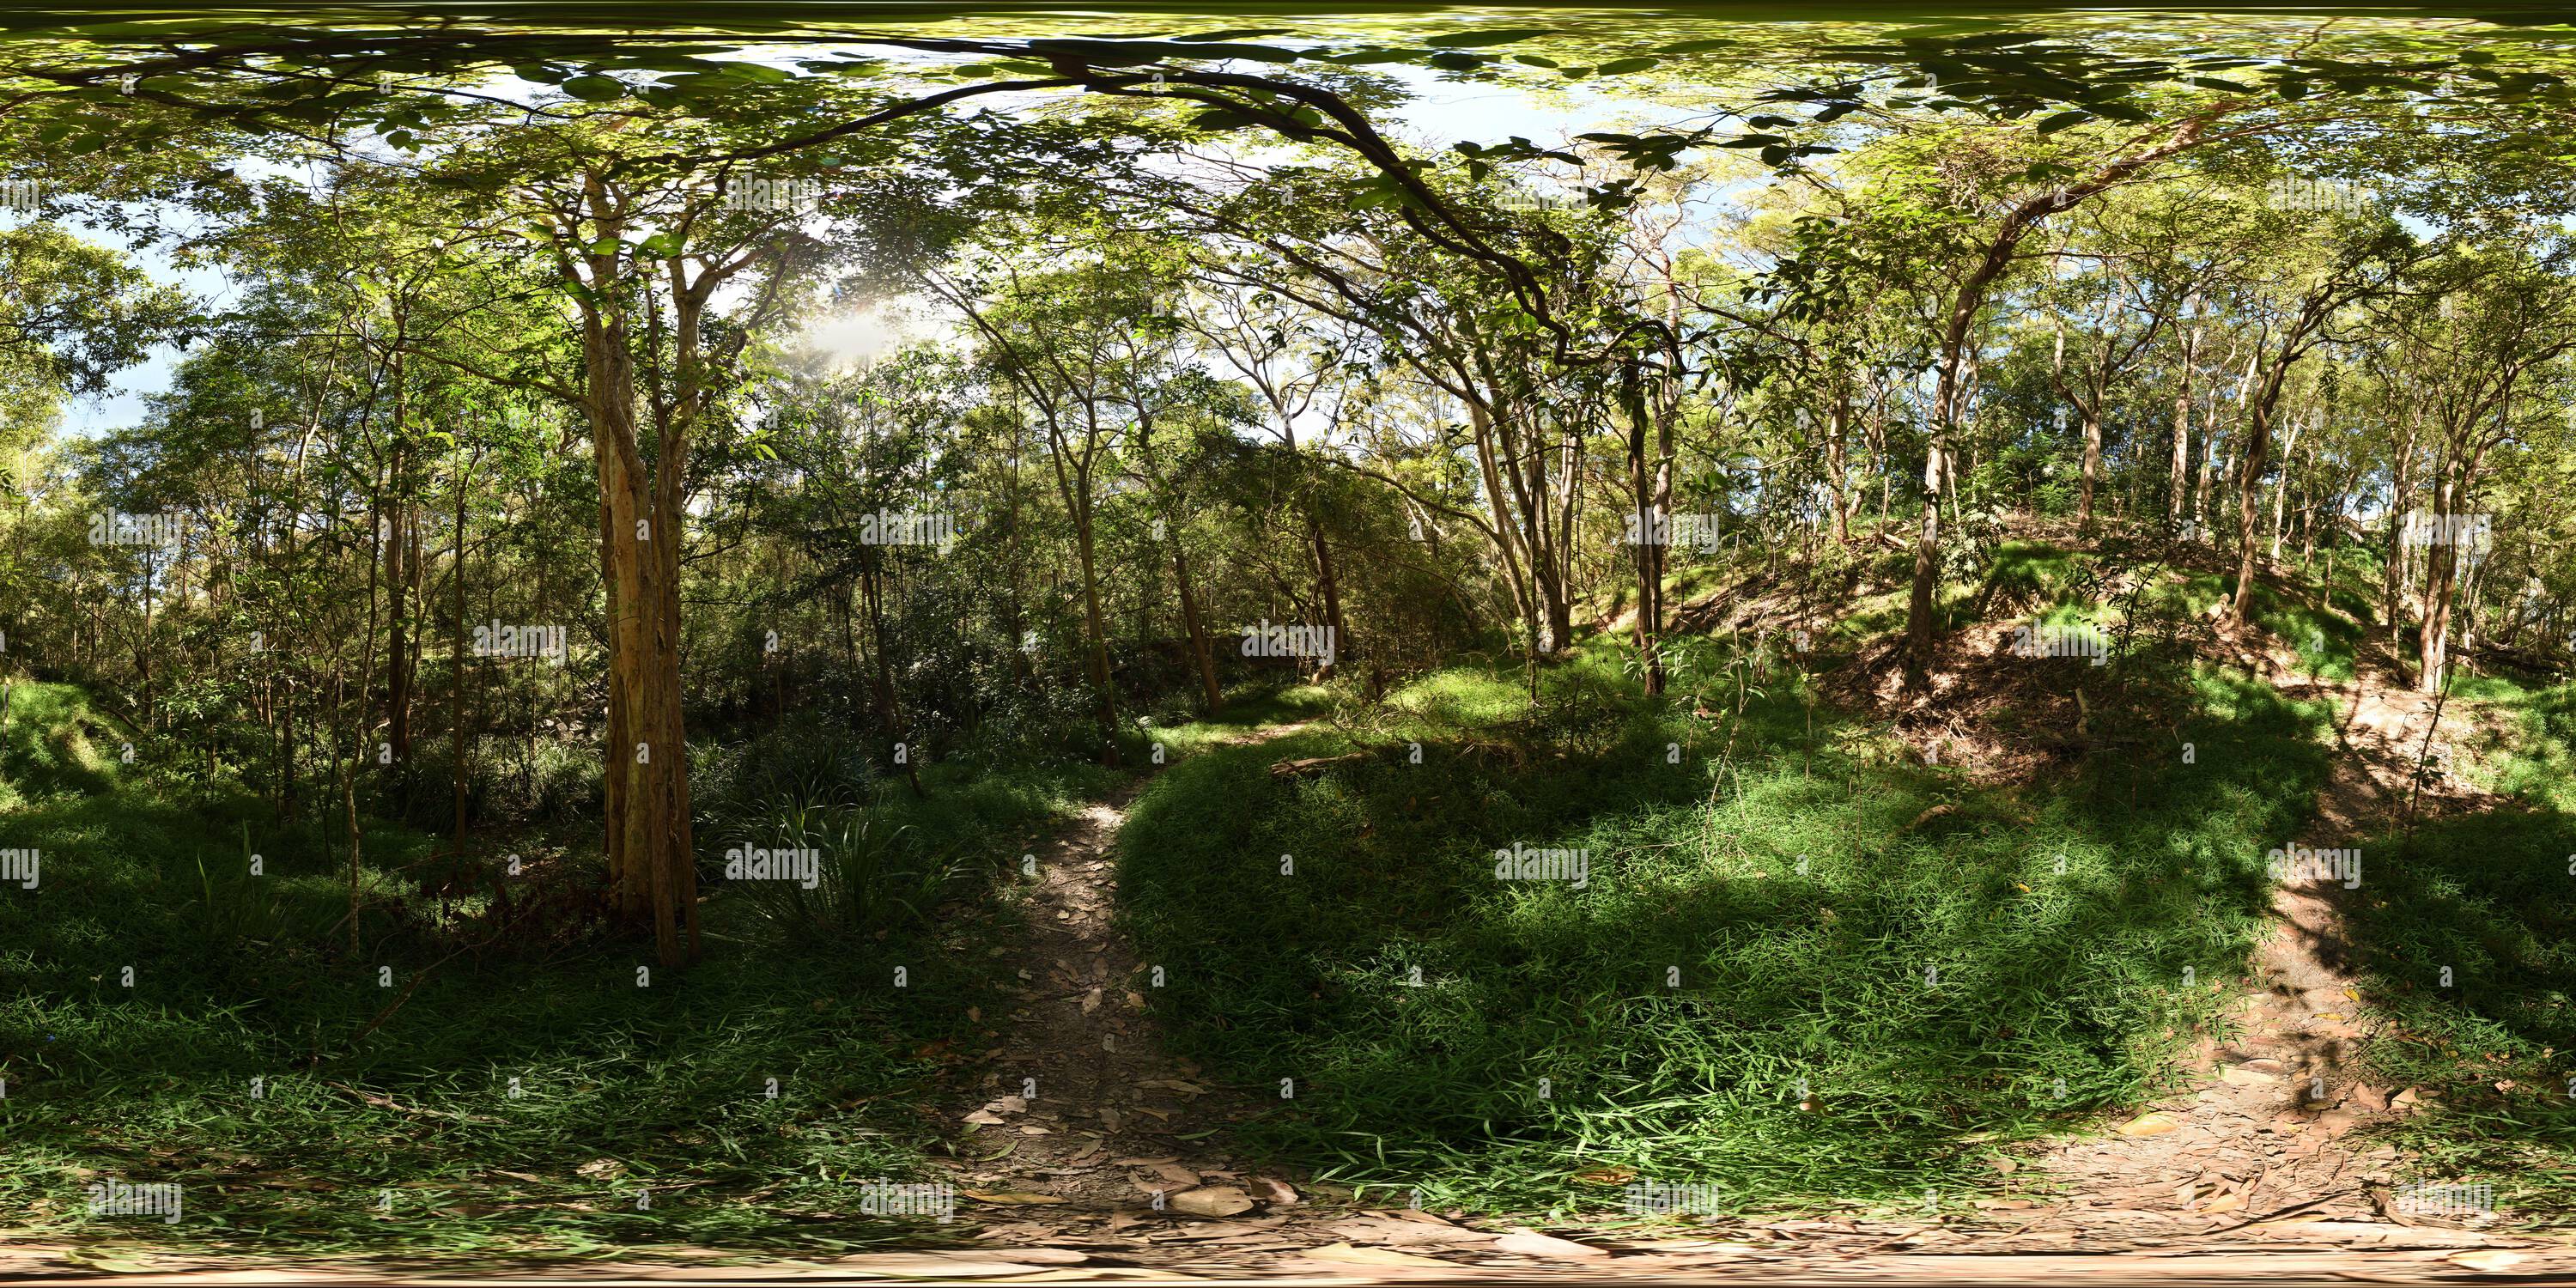 360 degree panoramic view of Seven Hills Bushland Reserve, a green grassy trail following Perrin Creek with Paperbarks and Eucalyptus trees